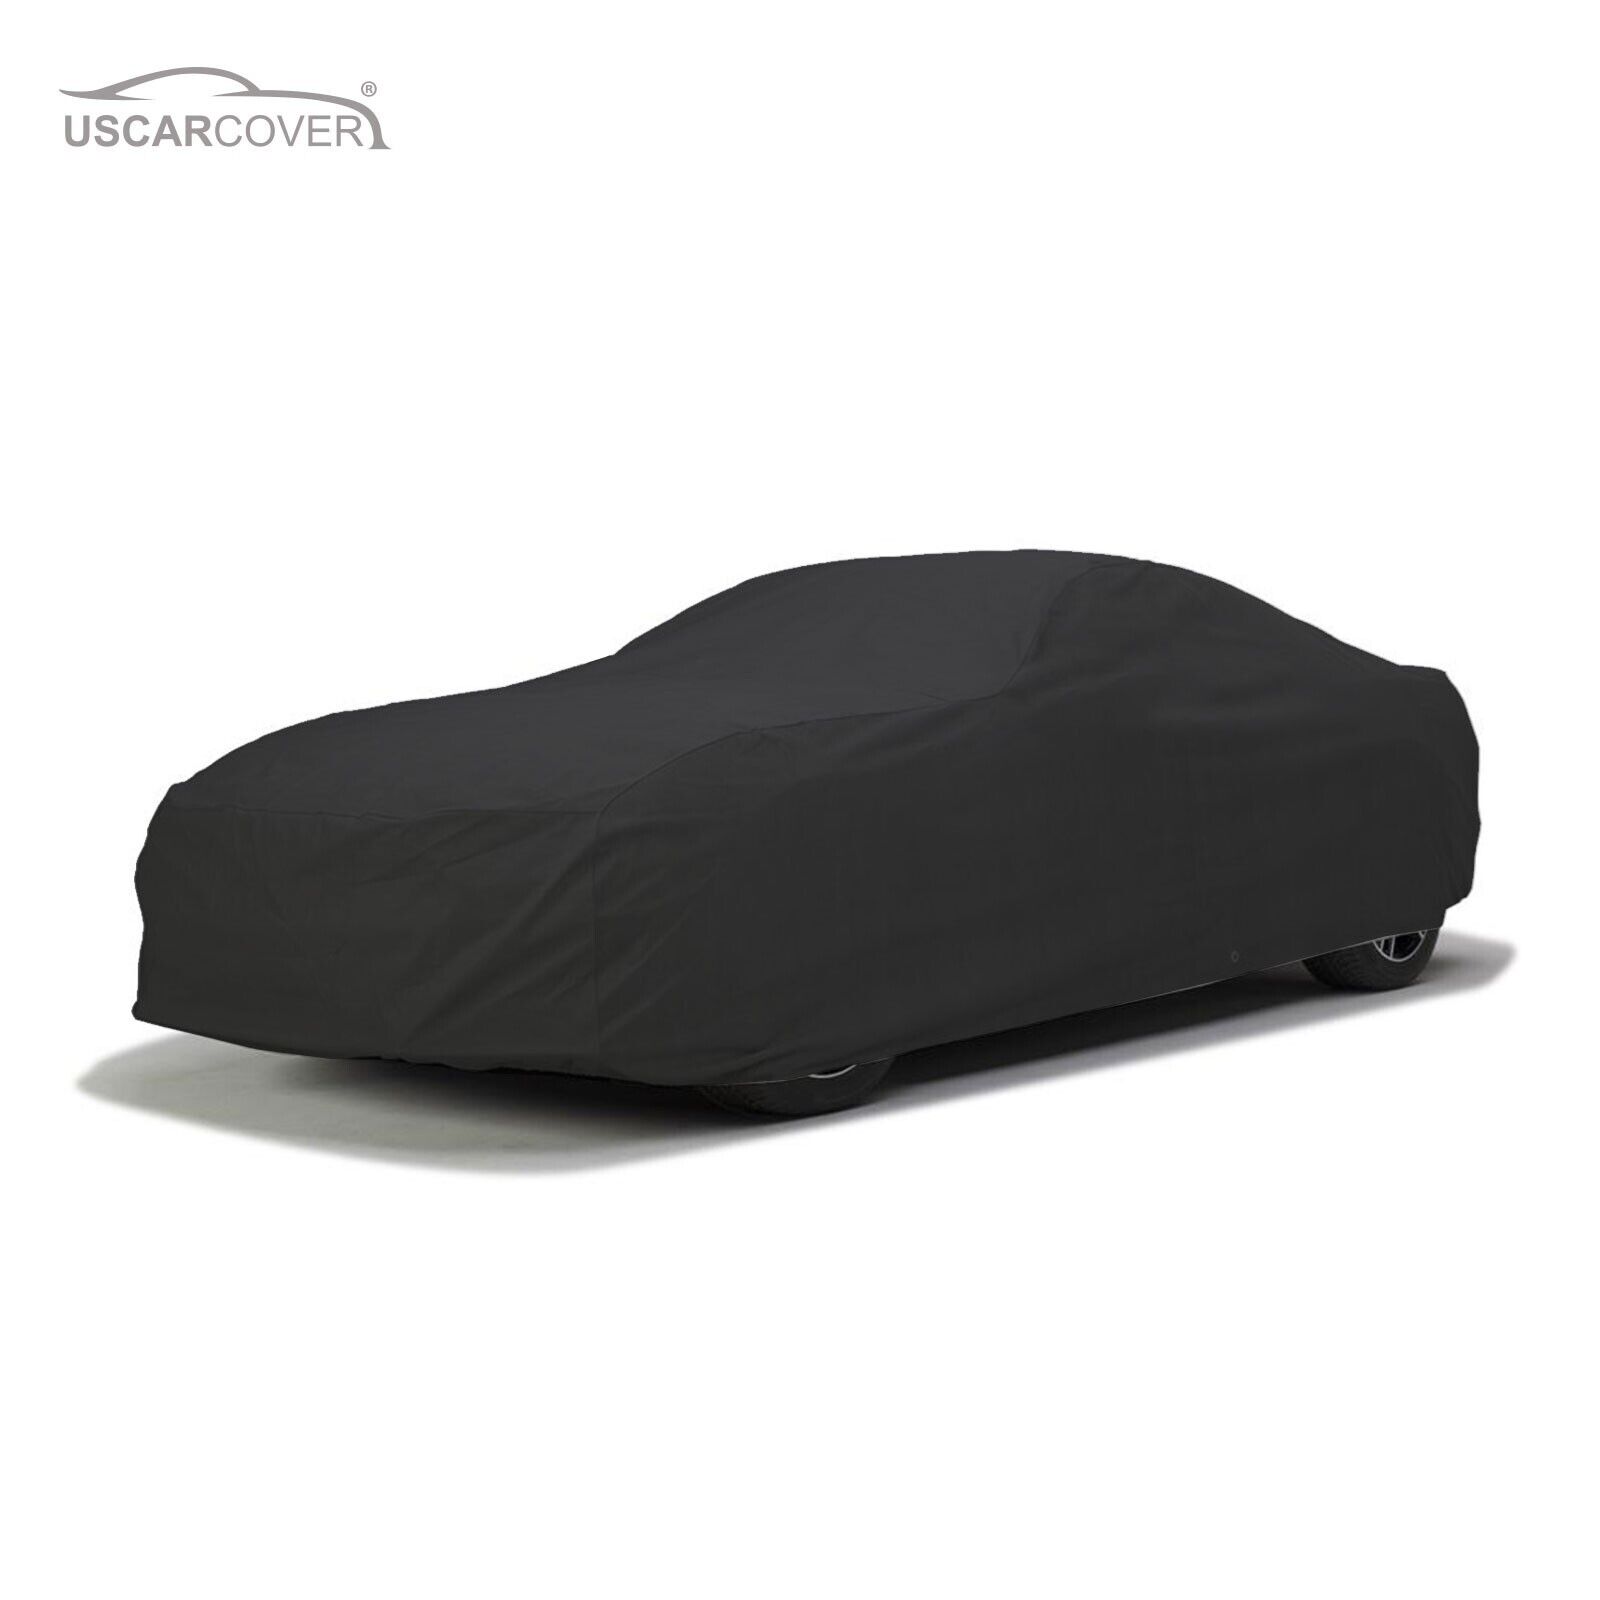 SoftTec Stretch Satin Indoor Car Cover for Cadillac DeVille 1959-1984 Coupe 2 Dr